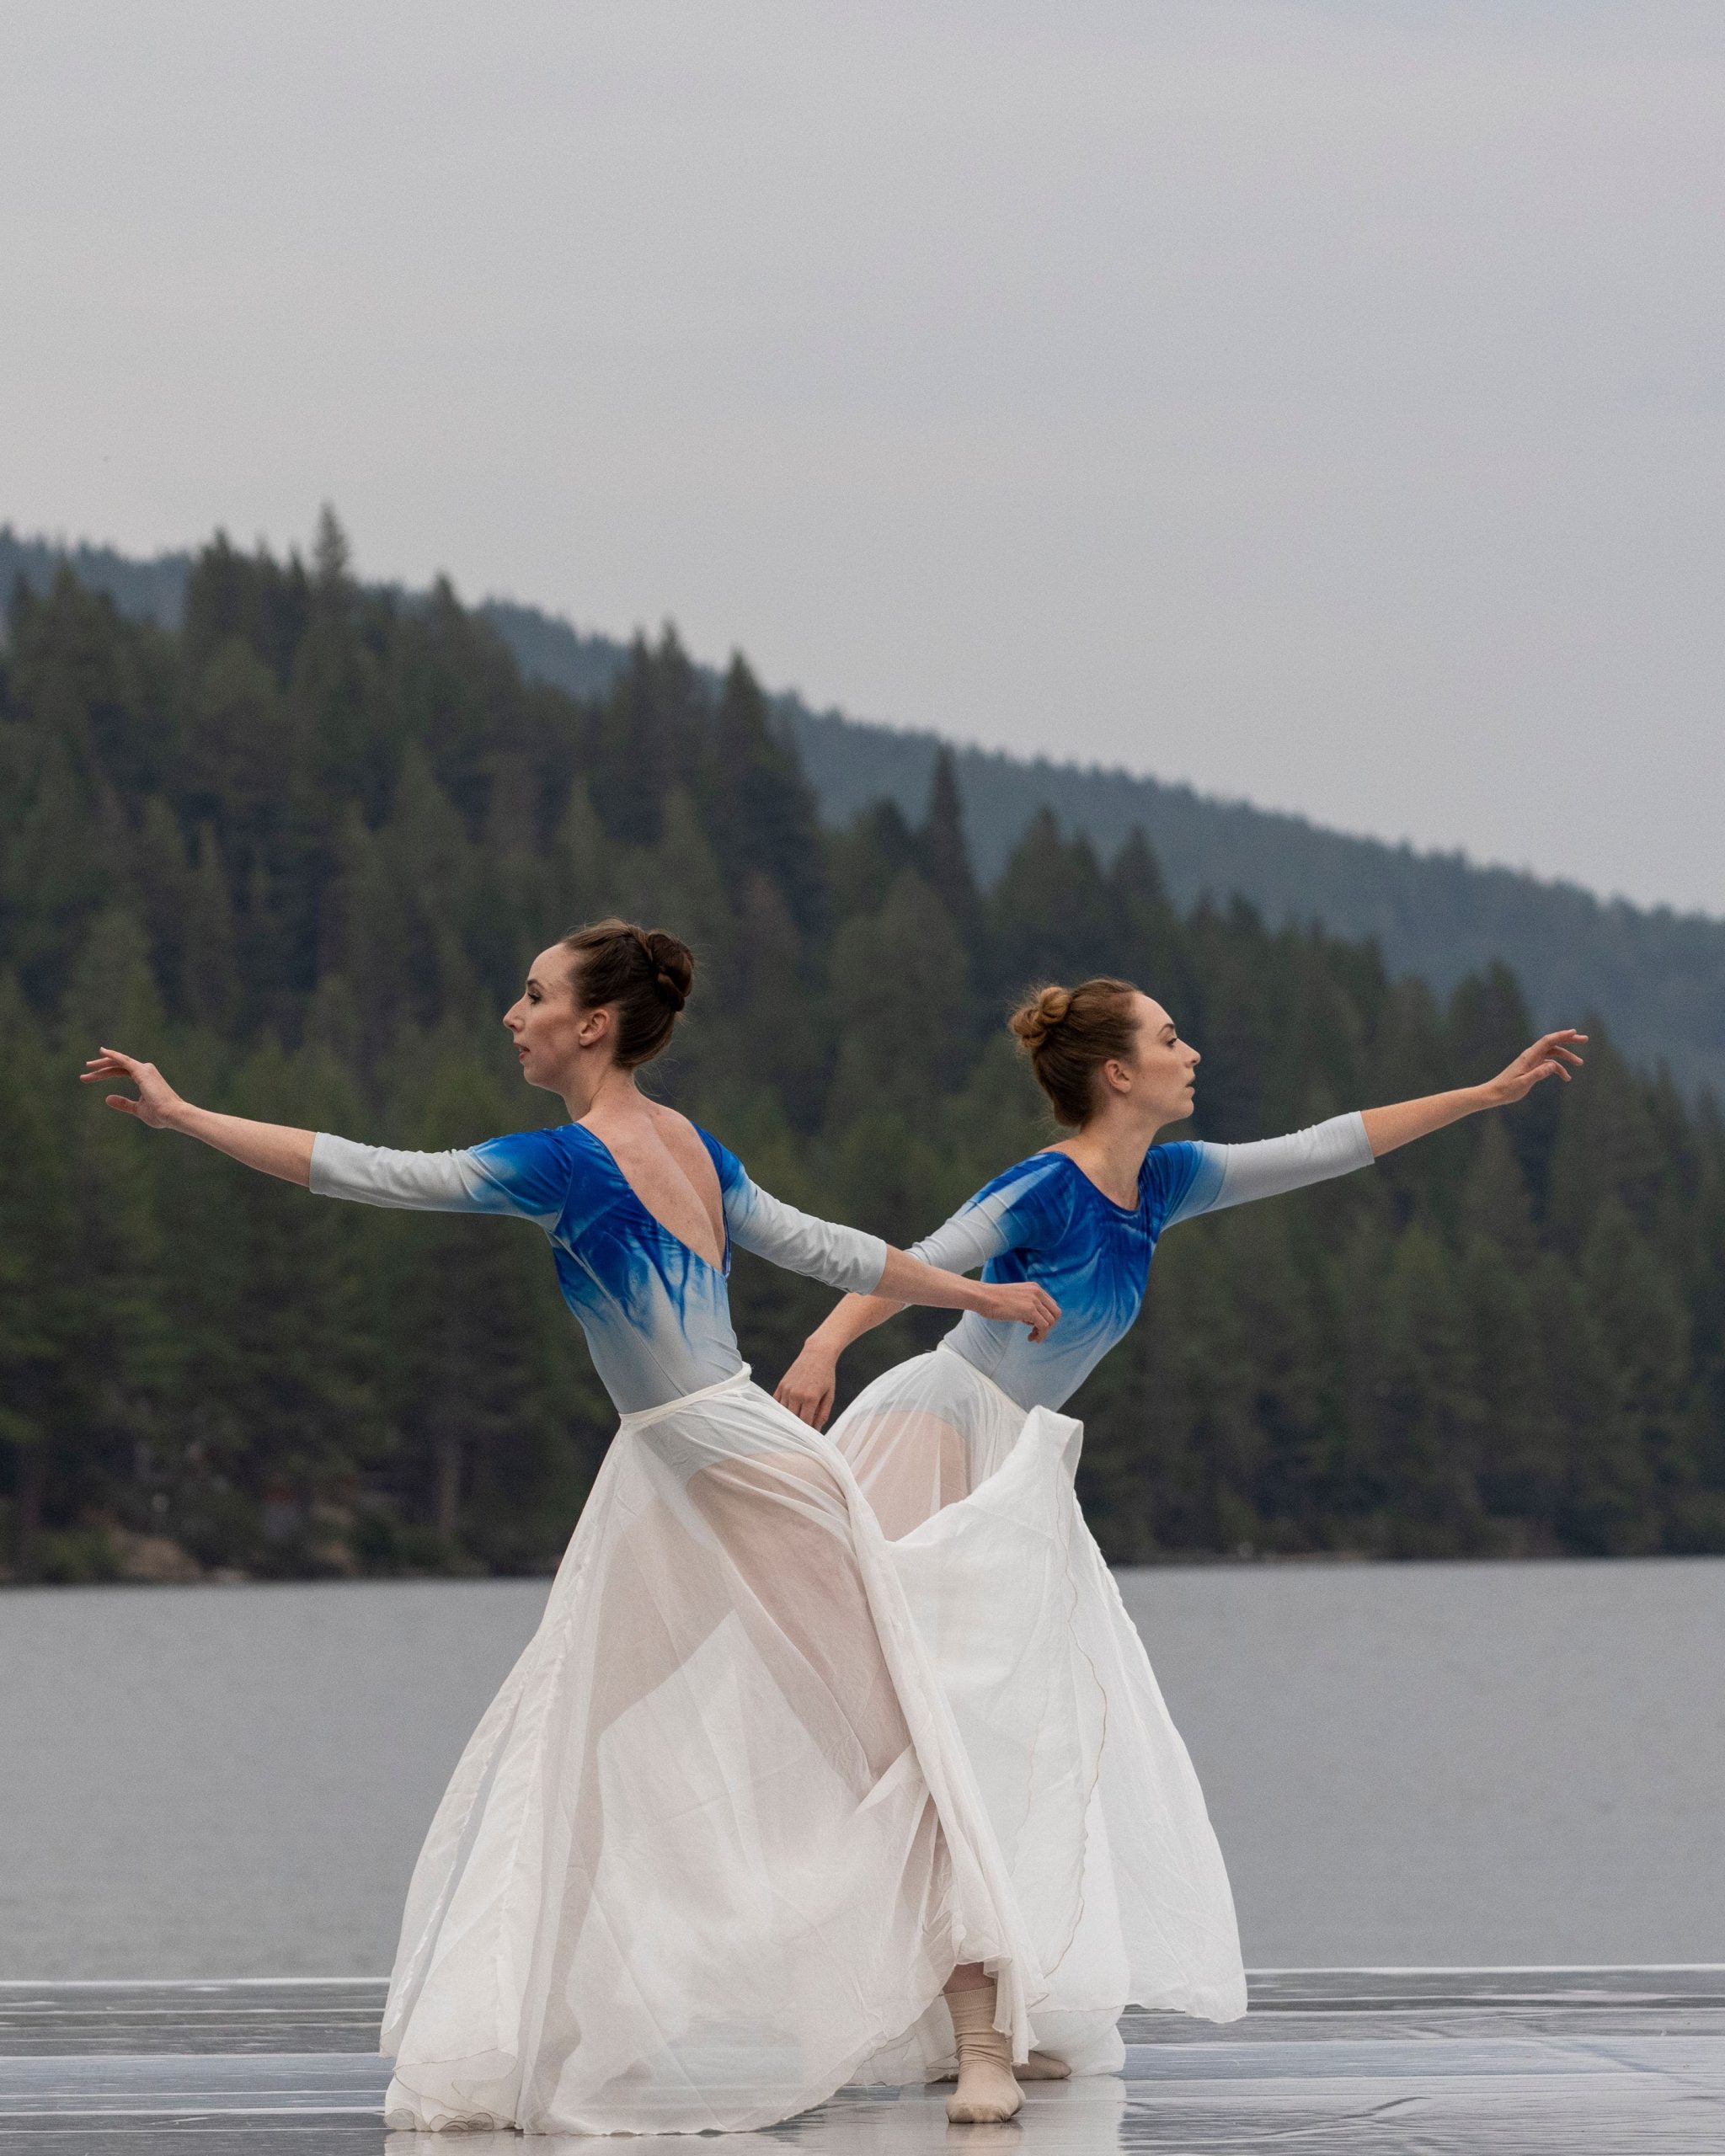 Tenth Annual Lake Tahoe Dance Festival: A Mesmerizing Showcase of Artistry and Movement! 17